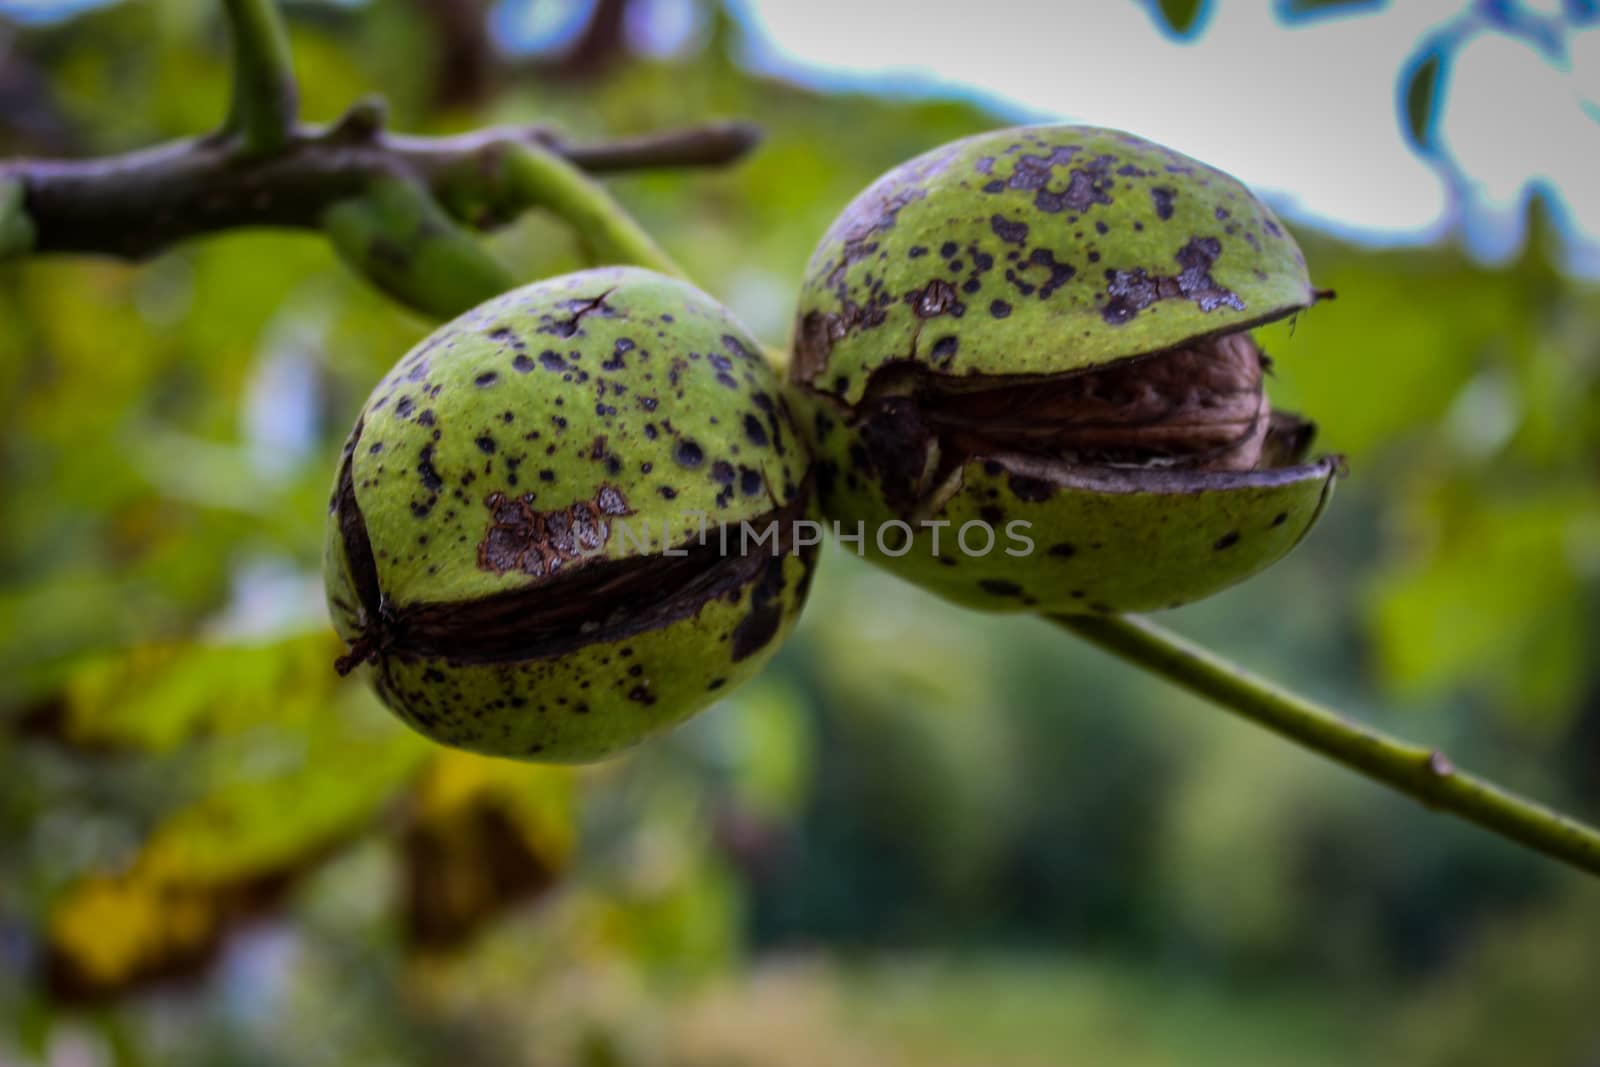 The green shells of the walnuts opened and two ripe walnuts protruded from them. Zavidovici, Bosnia and Herzegovina.